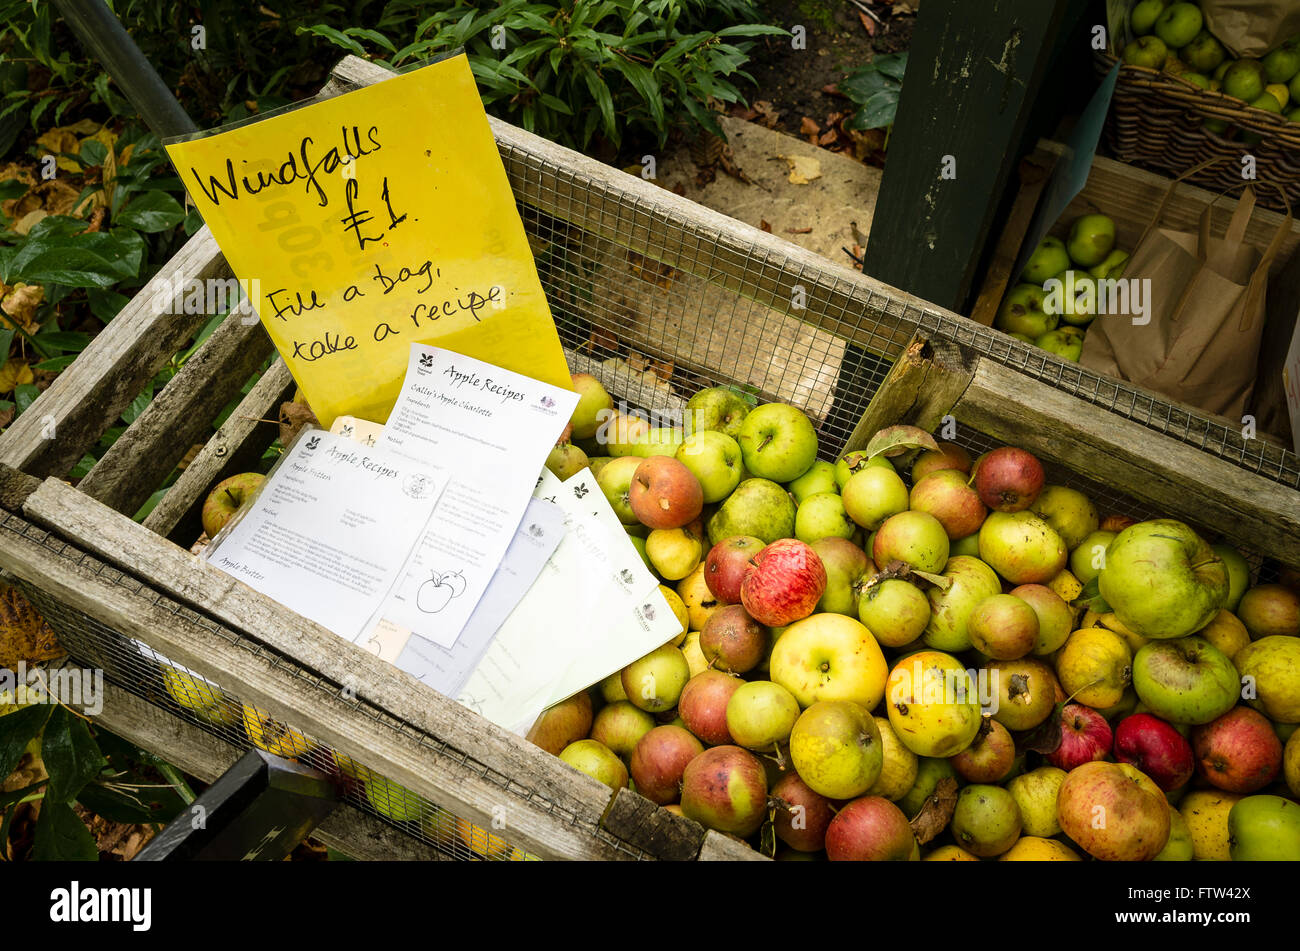 Windfall apples with suggested recipes offered at a NT garden to help raise funds Stock Photo